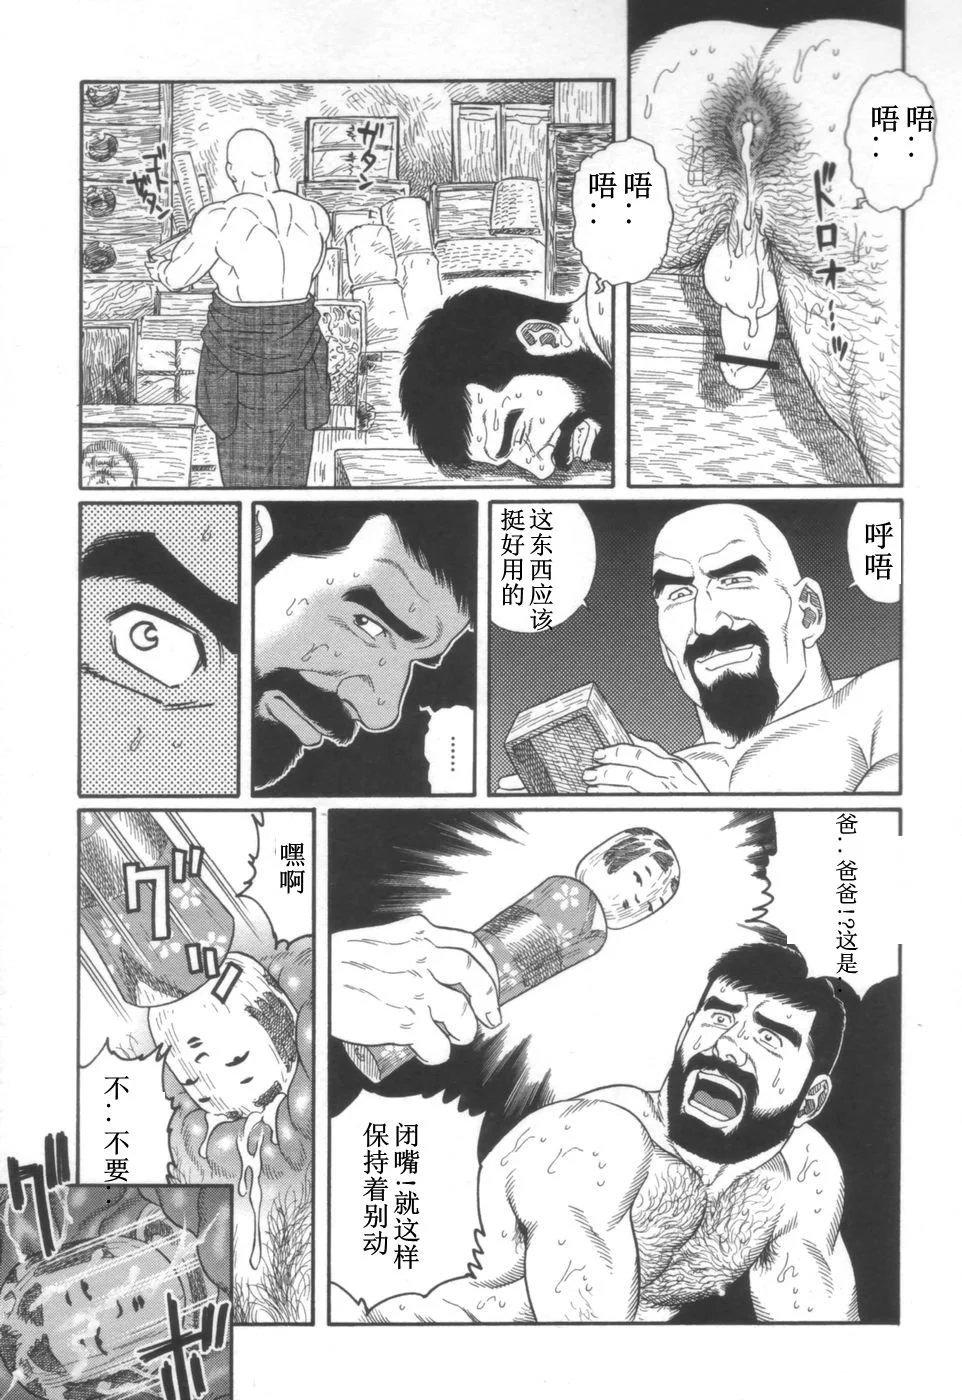 Hardcore Porn Free Gedou no Ie Joukan | 邪道之家 Vol. 1 Ch.3 Youth Porn - Page 11